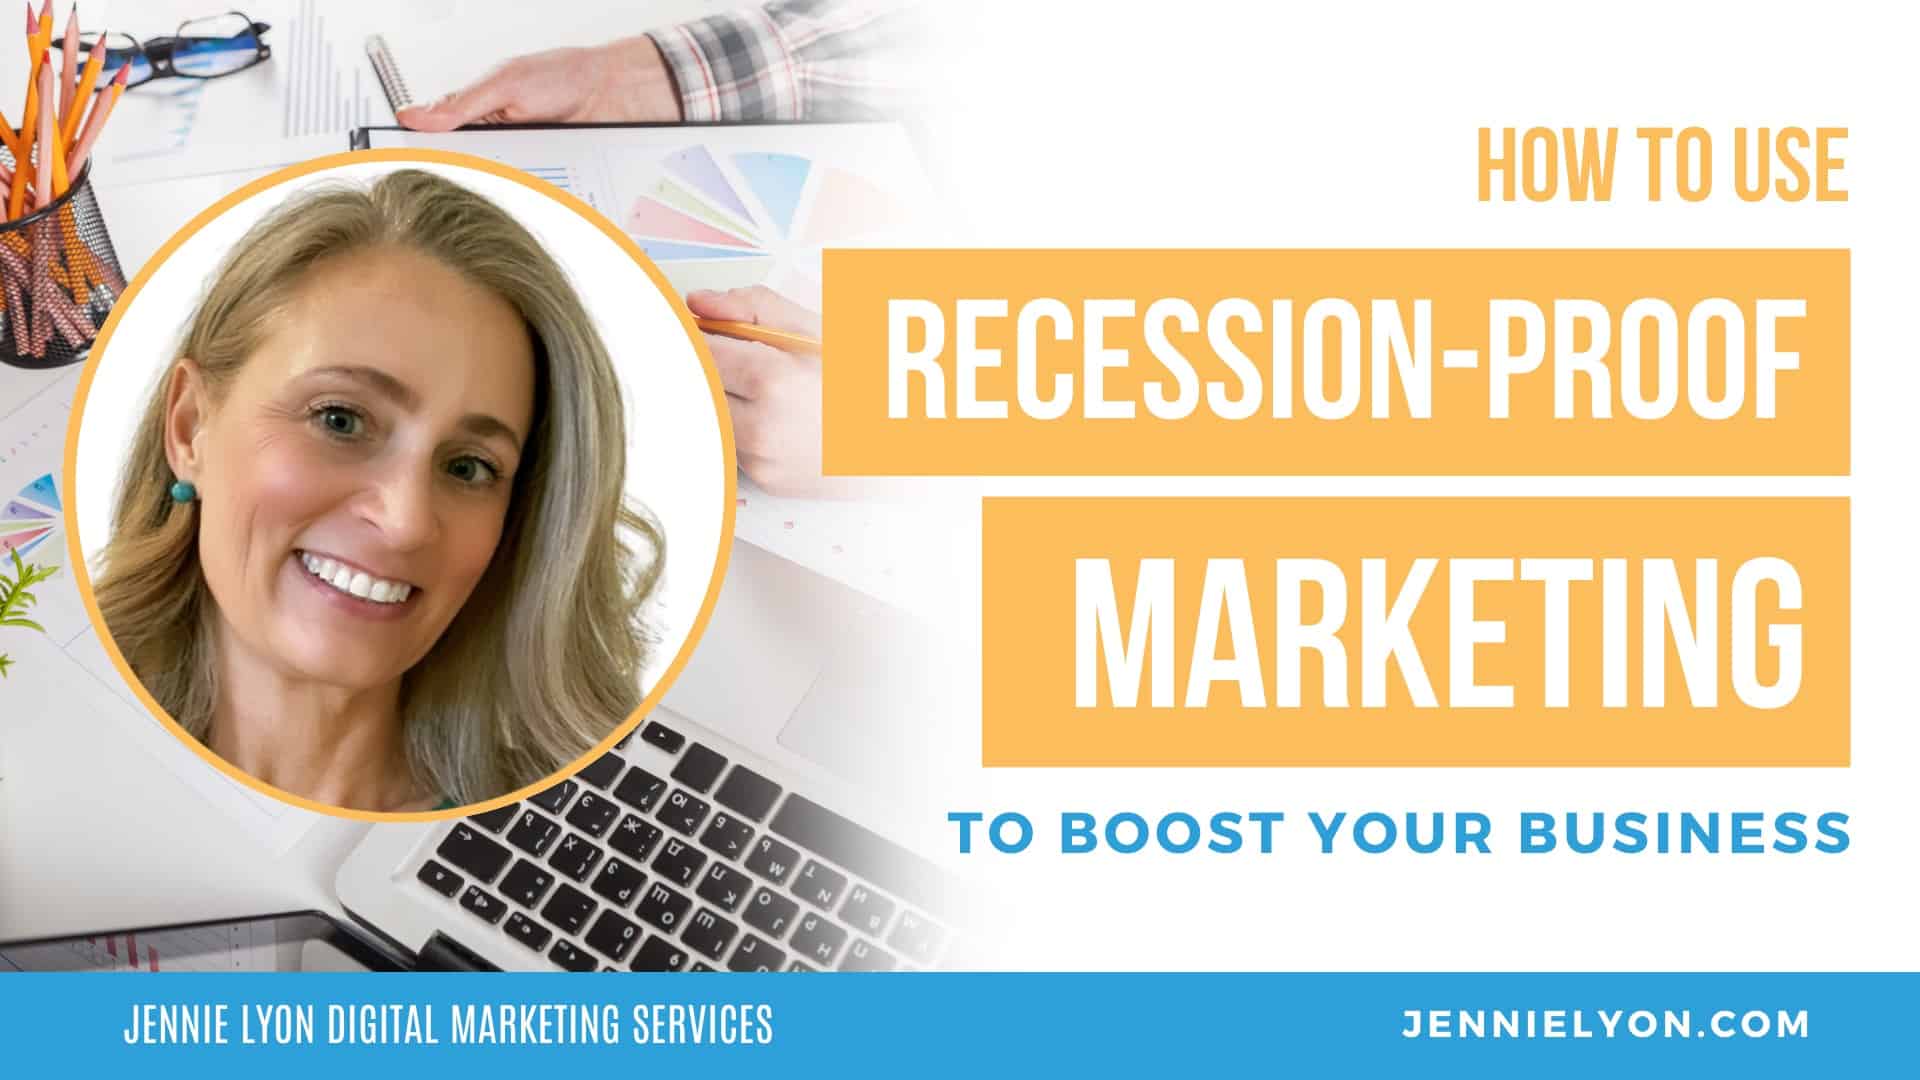 How to Use Recession-Proof Marketing To Boost Your Business